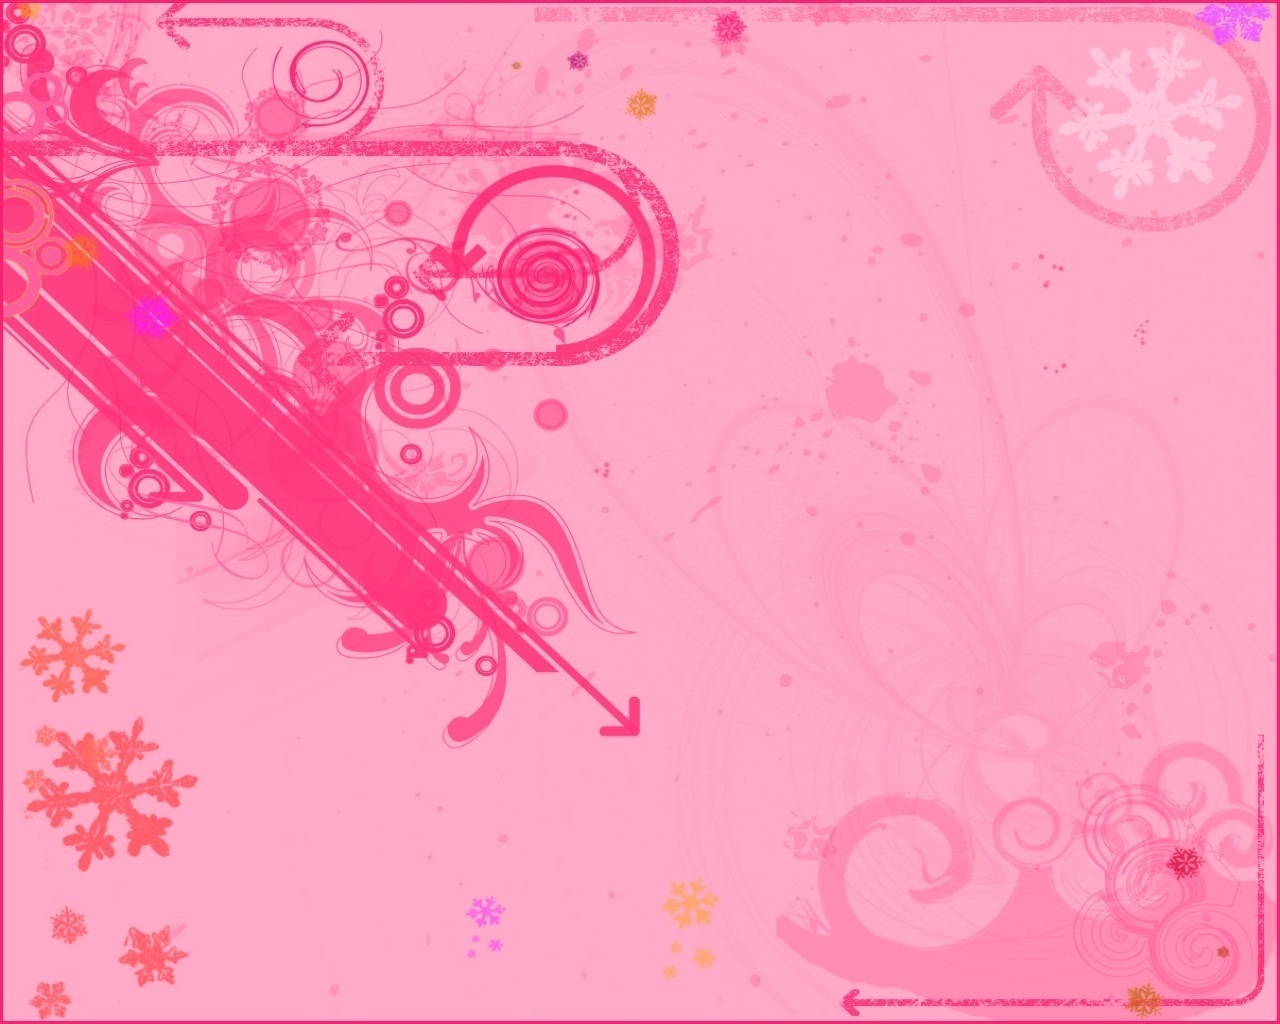 Cute Girly Wallpaper For Facebook Cute Girly Background